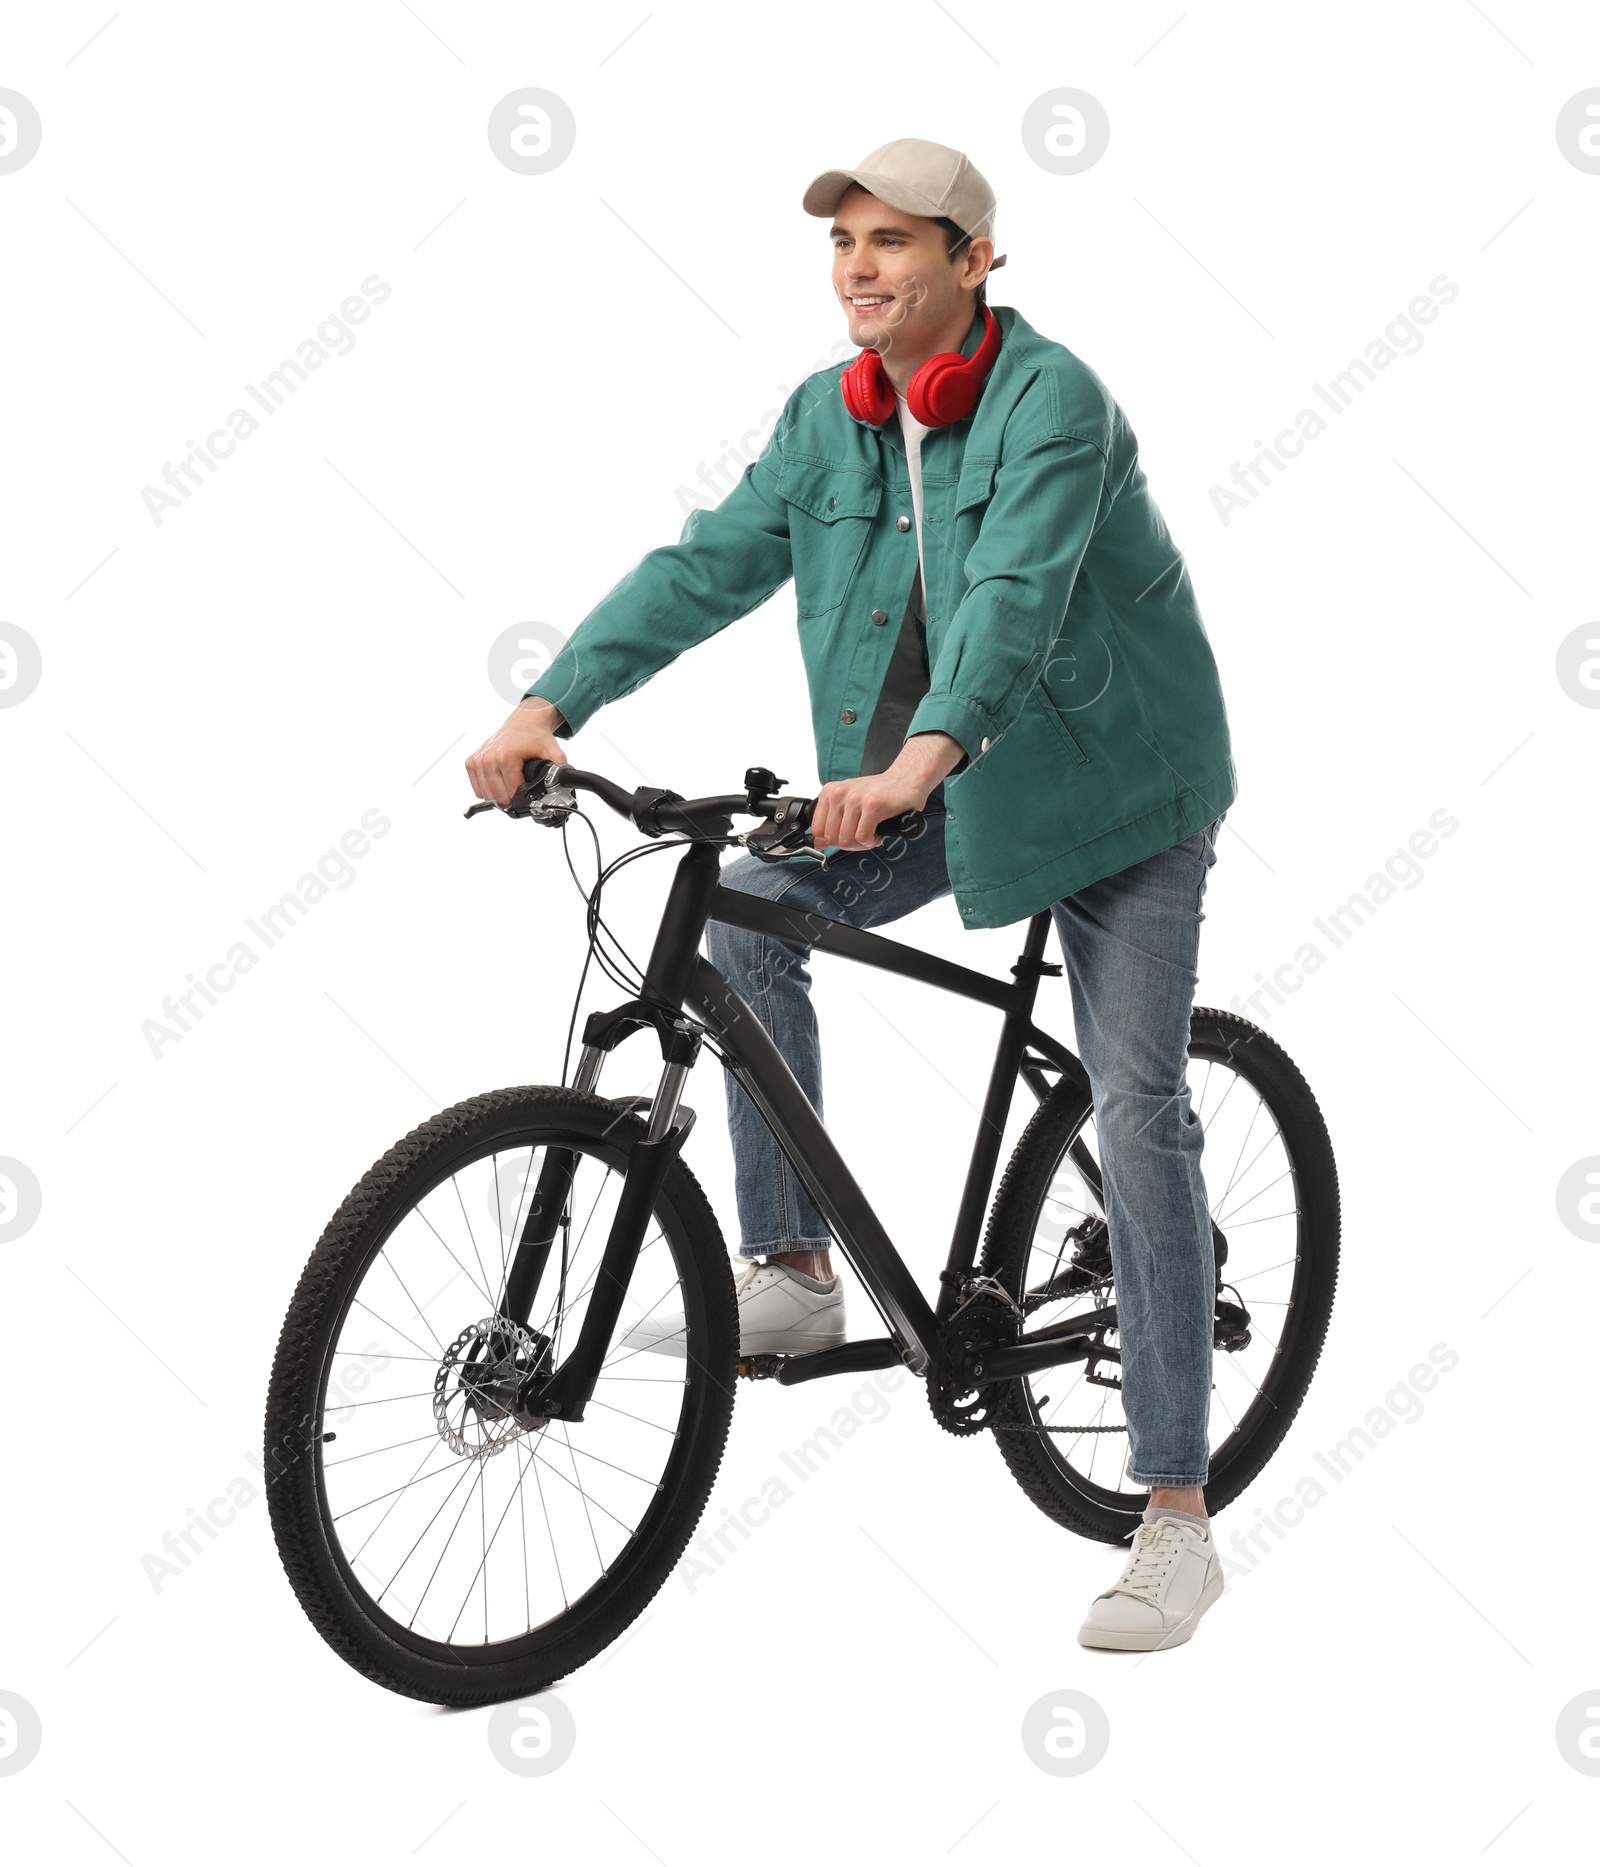 Photo of Smiling man with headphones on bicycle against white background